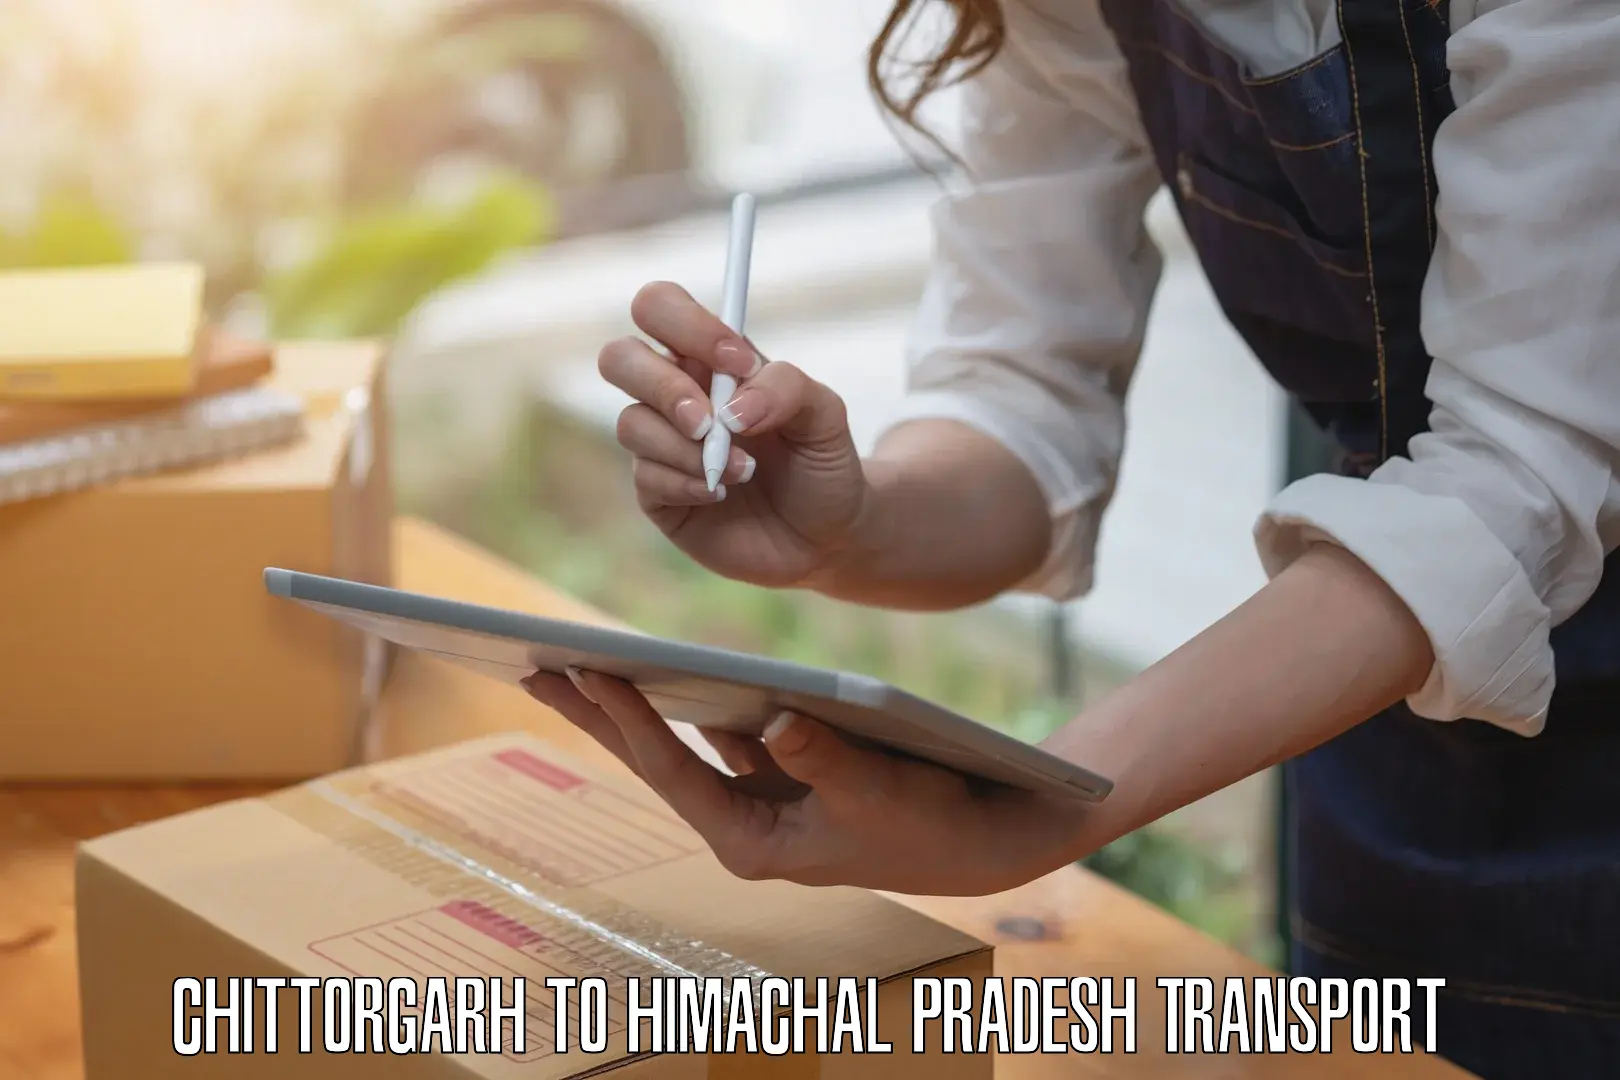 Air freight transport services Chittorgarh to YS Parmar University of Horticulture and Forestry Solan